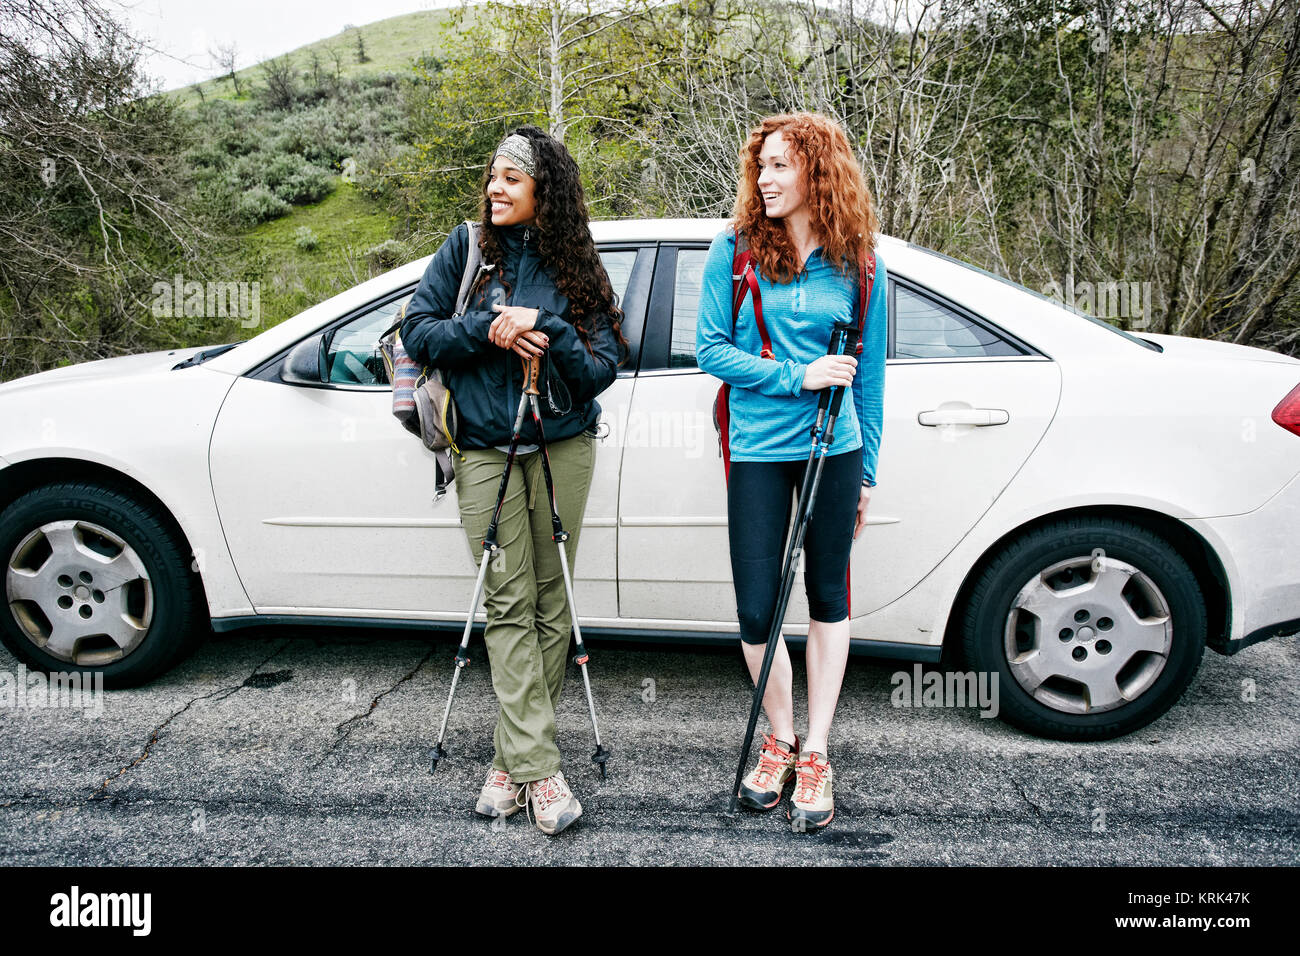 Smiling women standing near car hold and walking sticks Stock Photo